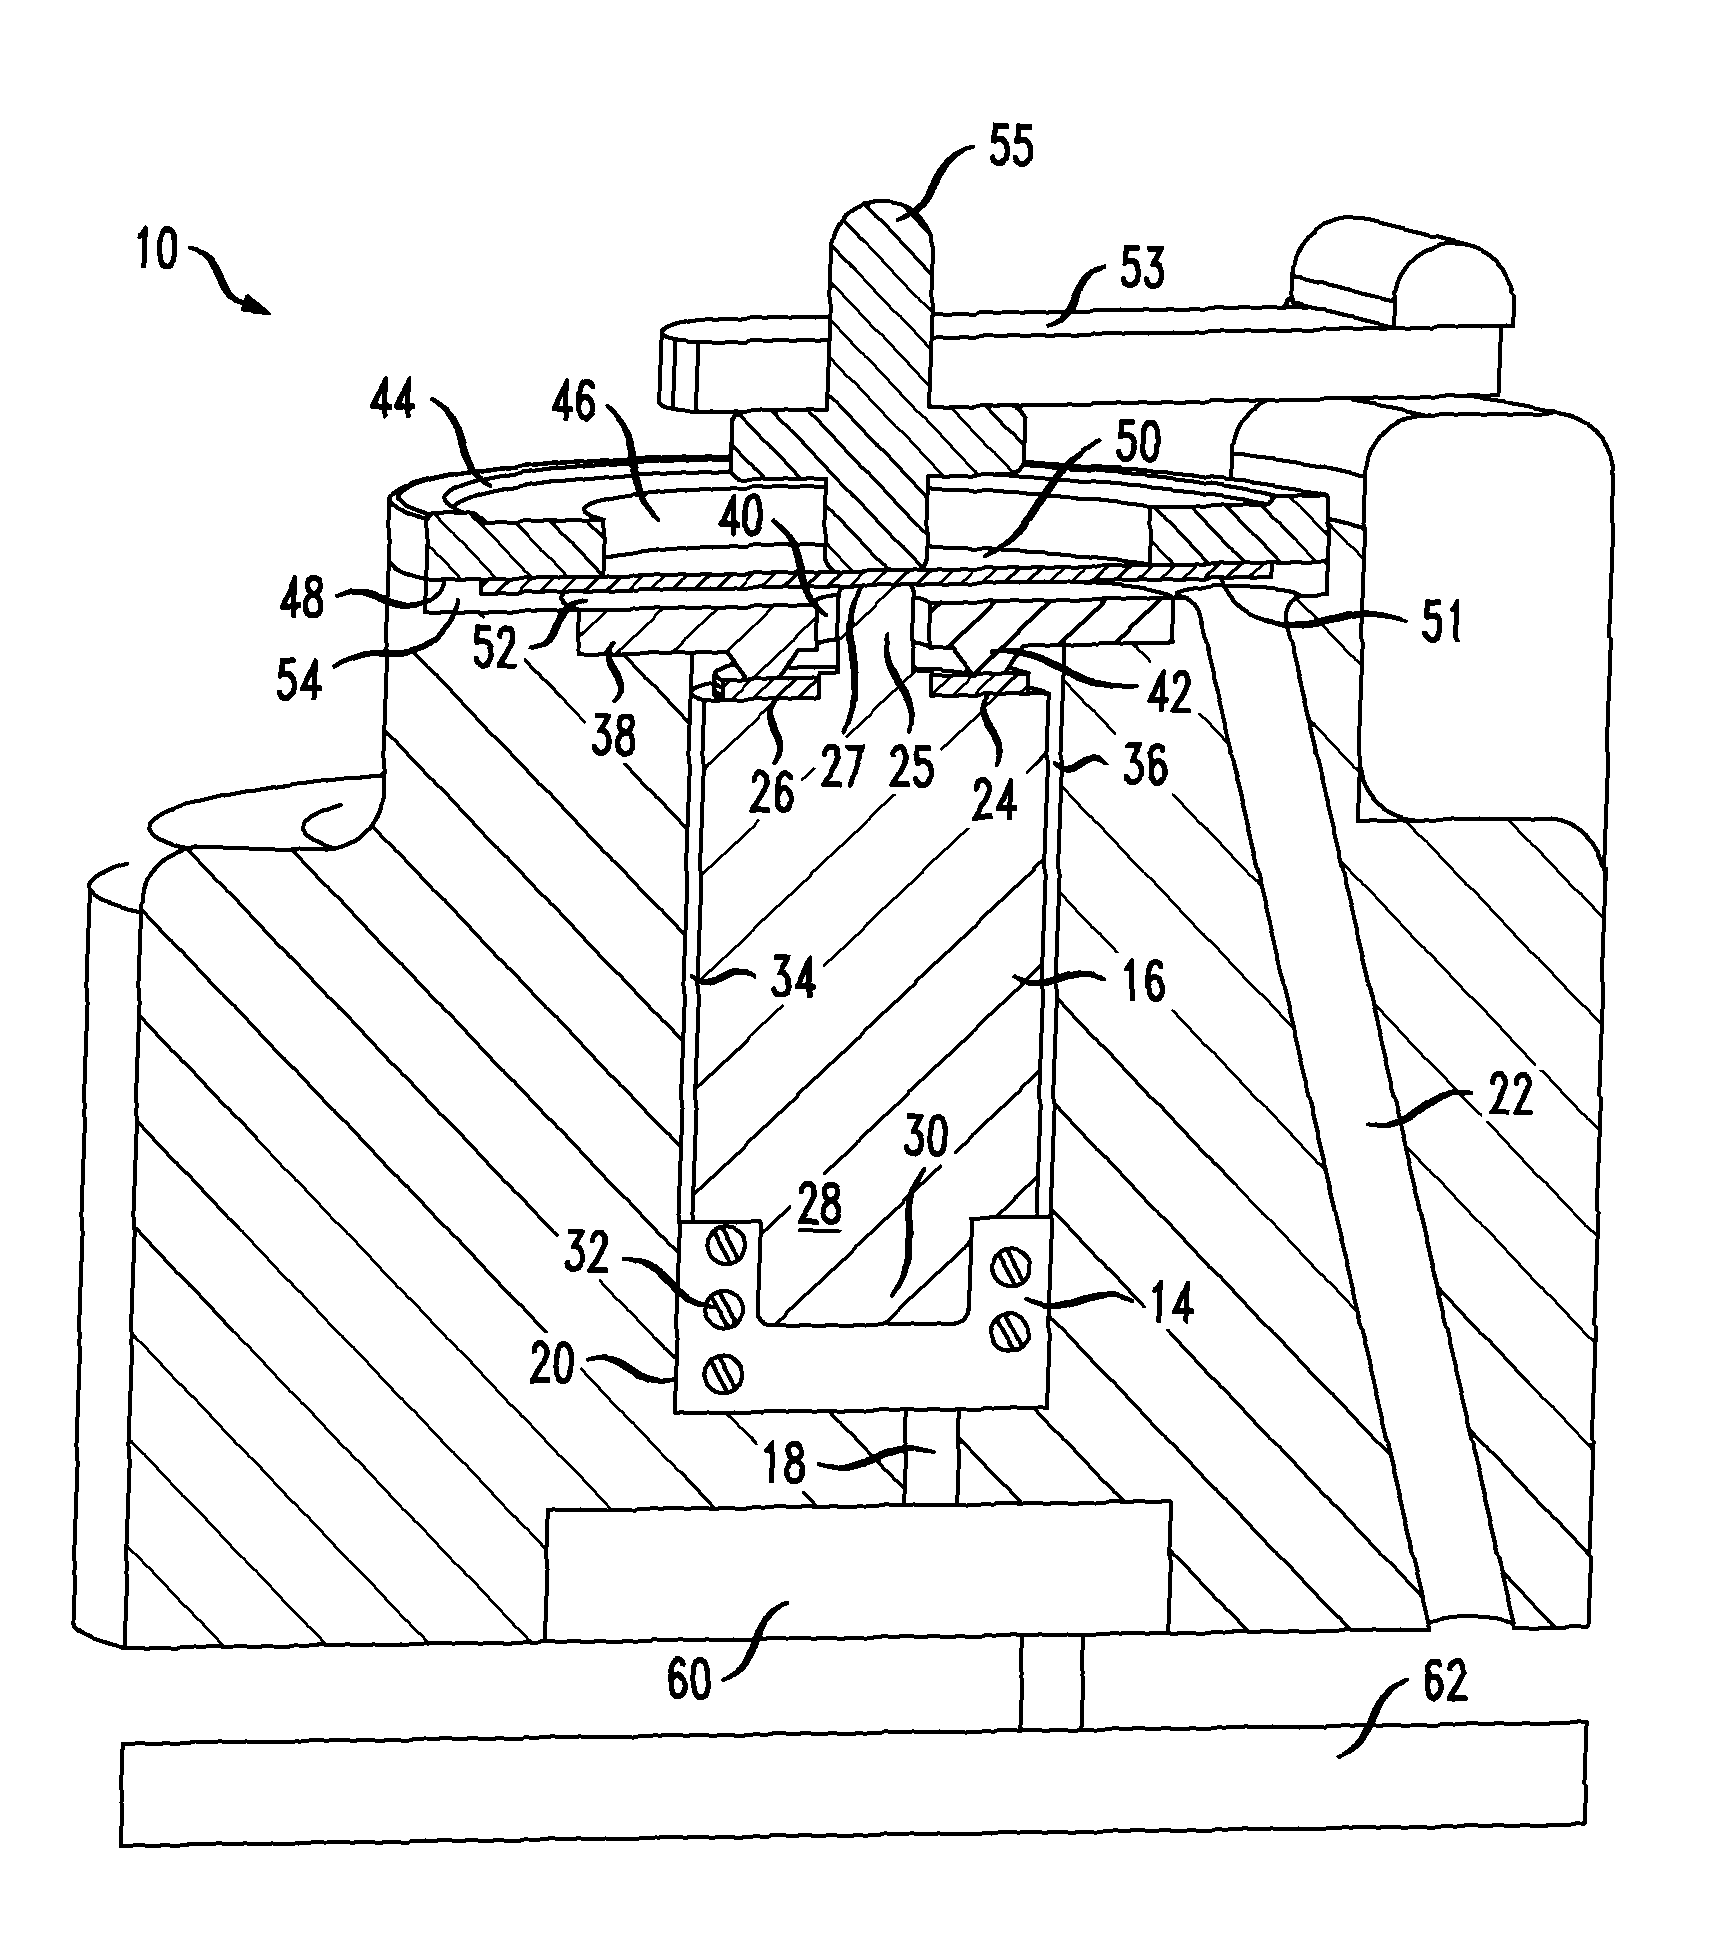 Flow rate accuracy of a fluidic delivery system